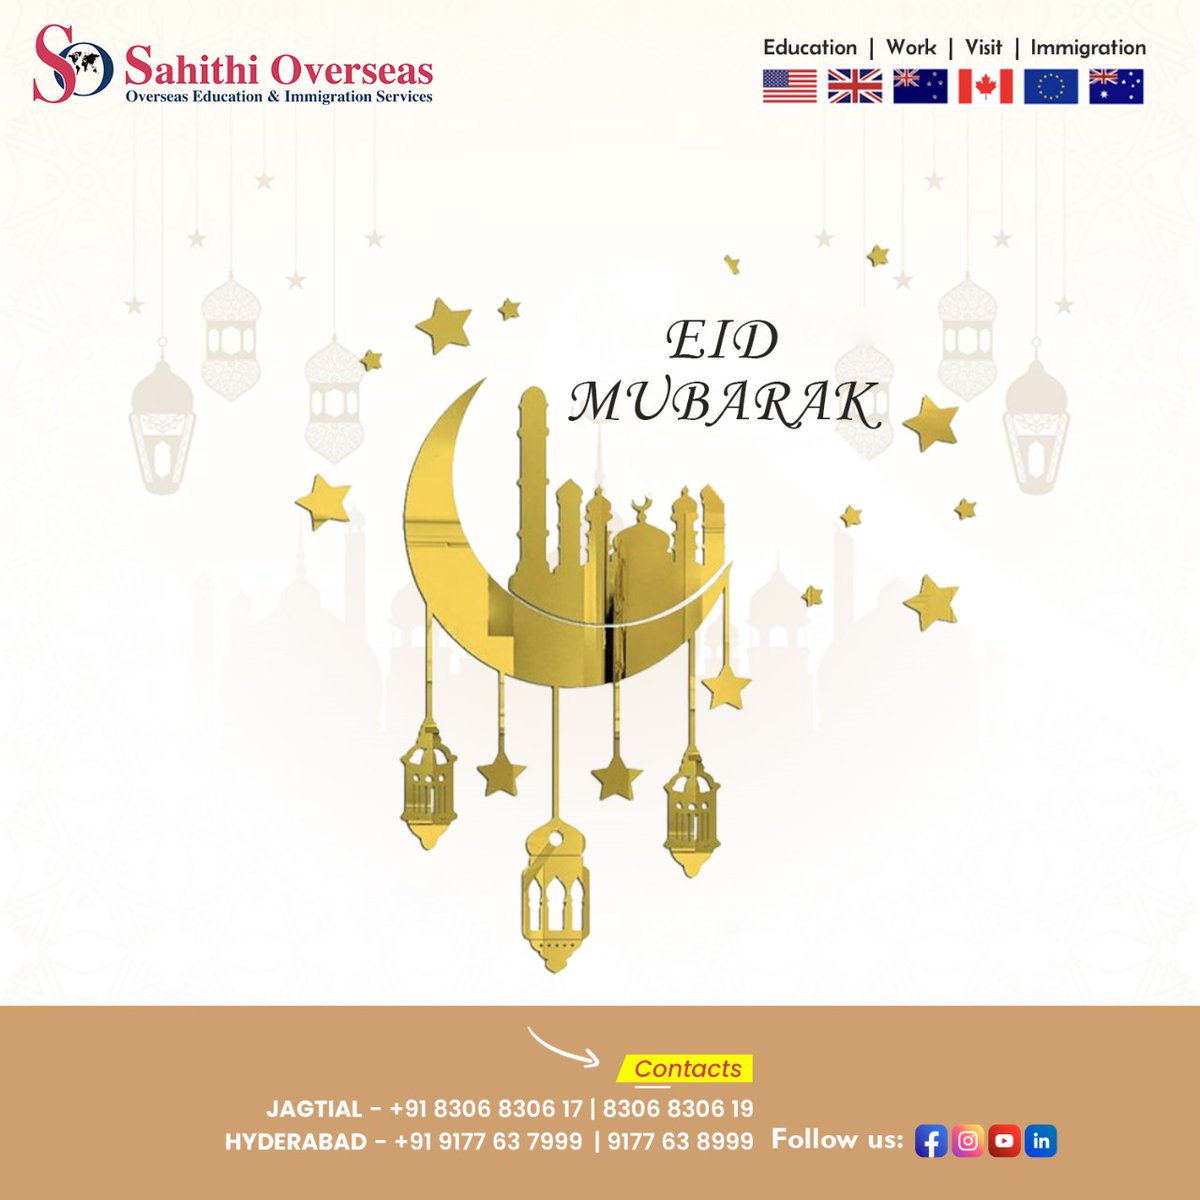 🌙✨ May your day be filled with happiness, blessings, and unforgettable moments with loved ones. Let's celebrate this joyous occasion together! Eid Mubarak!

#StudyOverseas #EducationOpportunities #educationforall #dreambig #studyabroadlife #SahithiOverseas #StudyAbroad